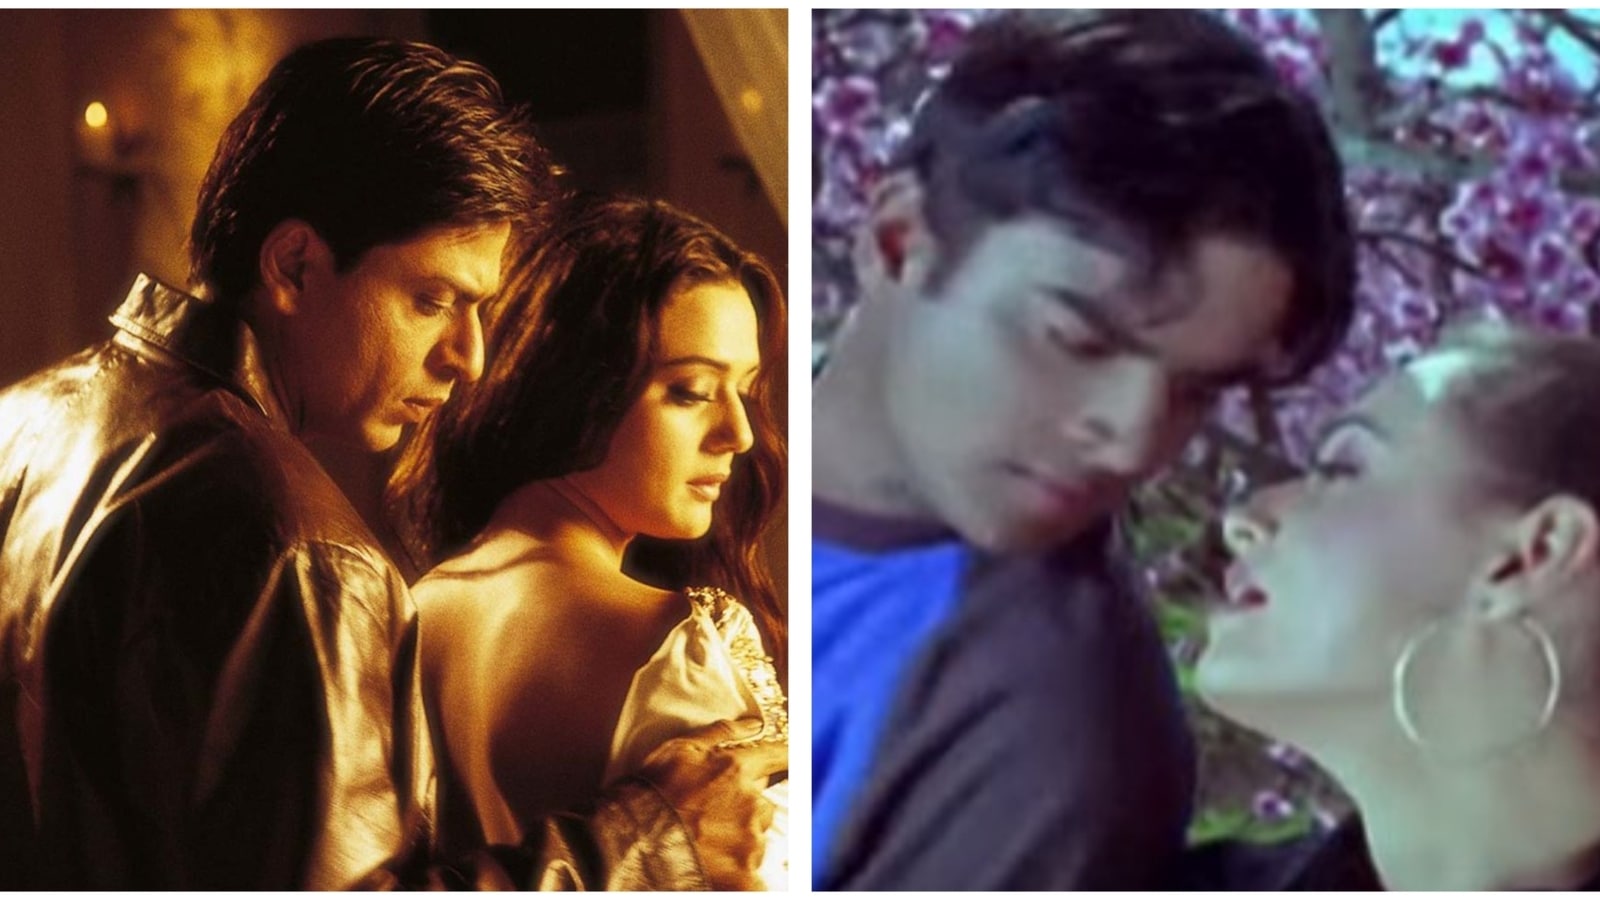 While Bad Newz song “Jaanam” is compared to “condom ad”, 6 Indian songs that actually portray intimacy correctly